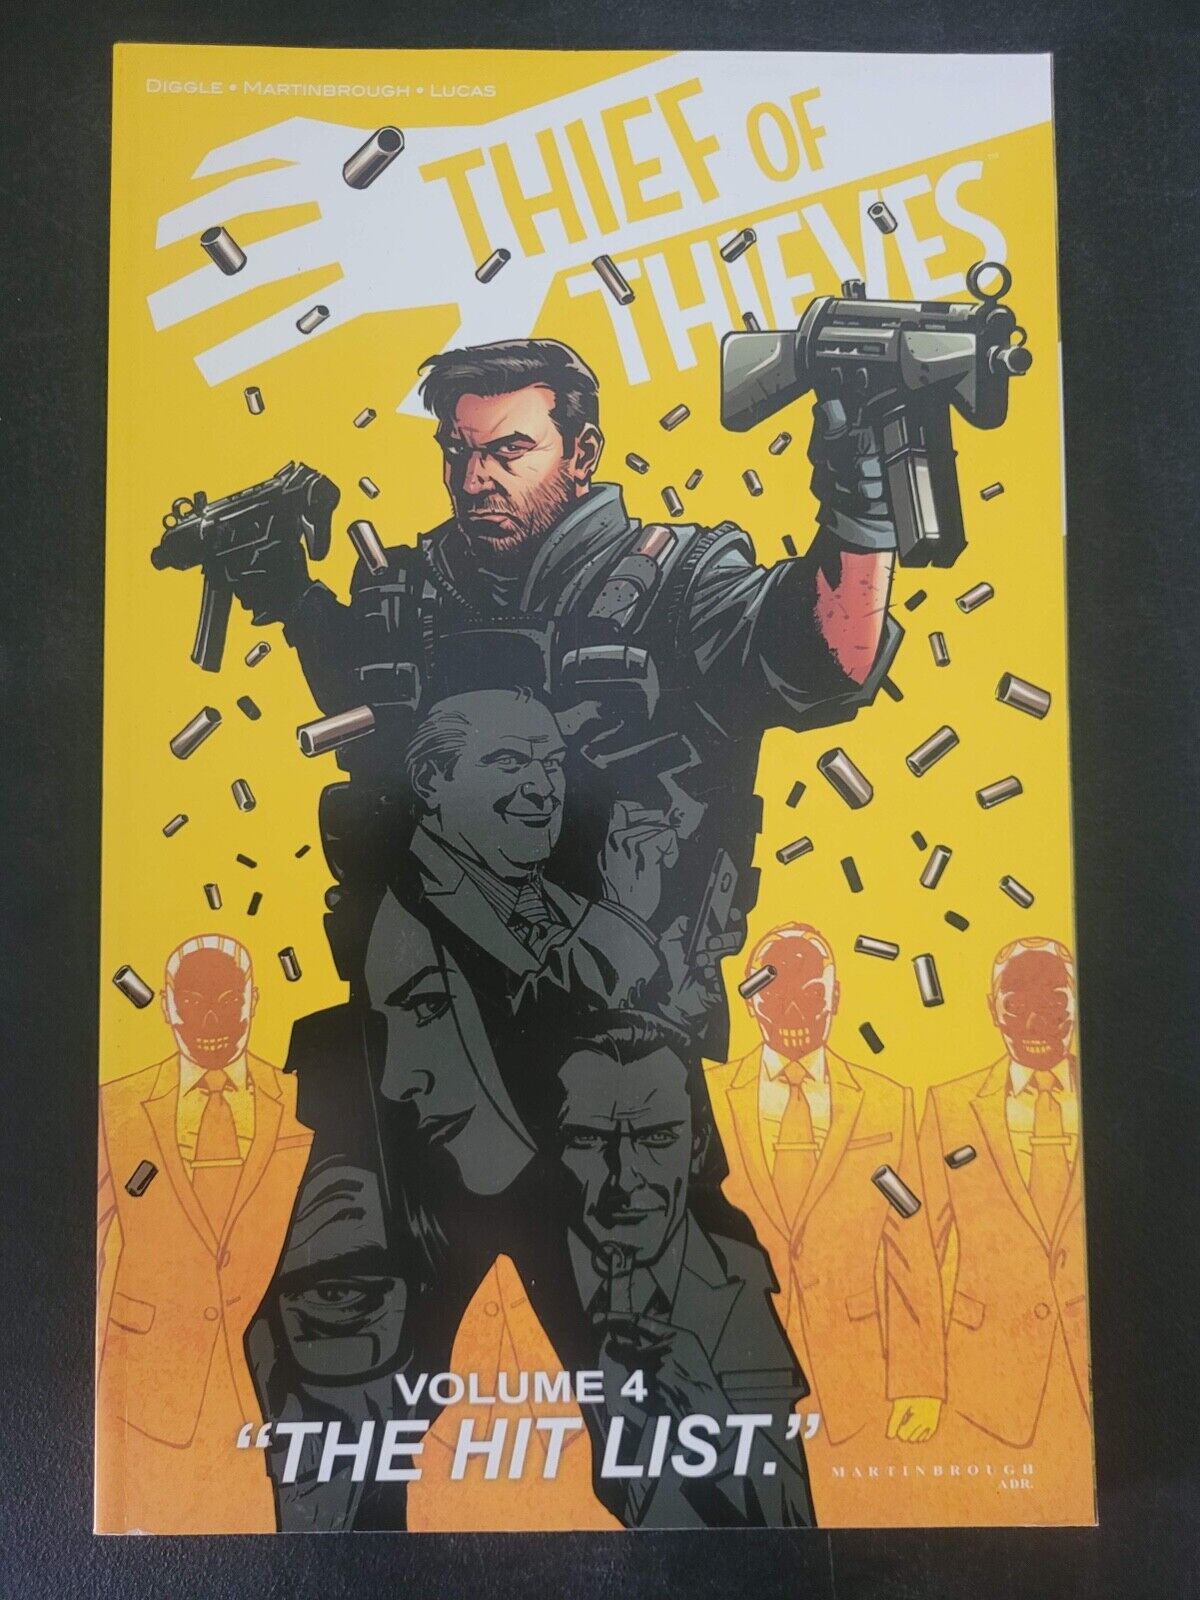 THIEF OF THIEVES Volume 4 THE HIT LIST TPB 2014 SKYBOUND IMAGE COMICS